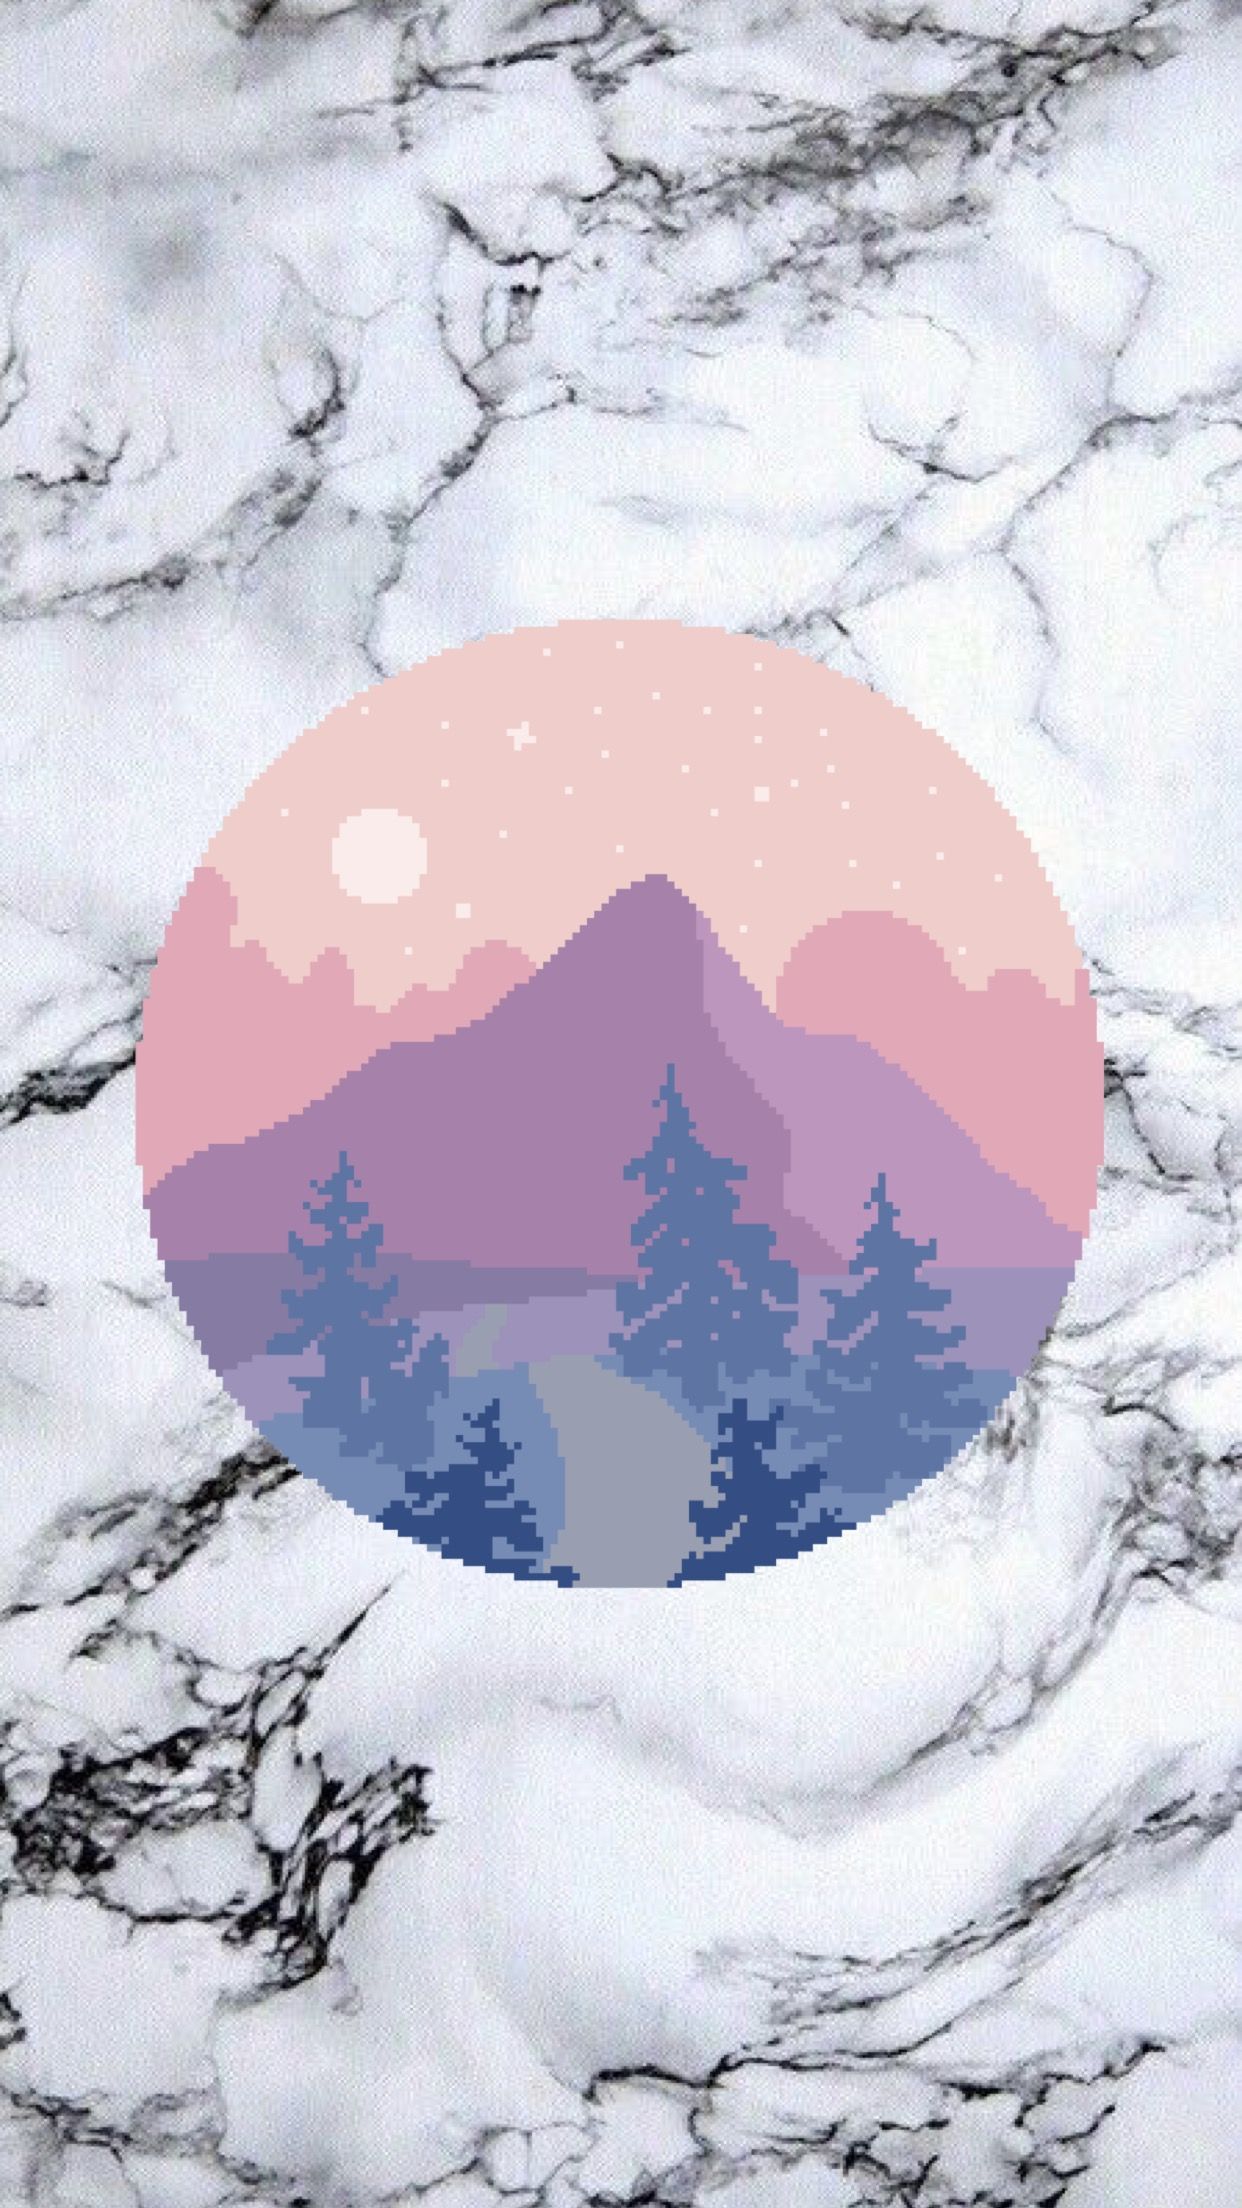 Iphone wallpaper background with mountains and trees - Mountain